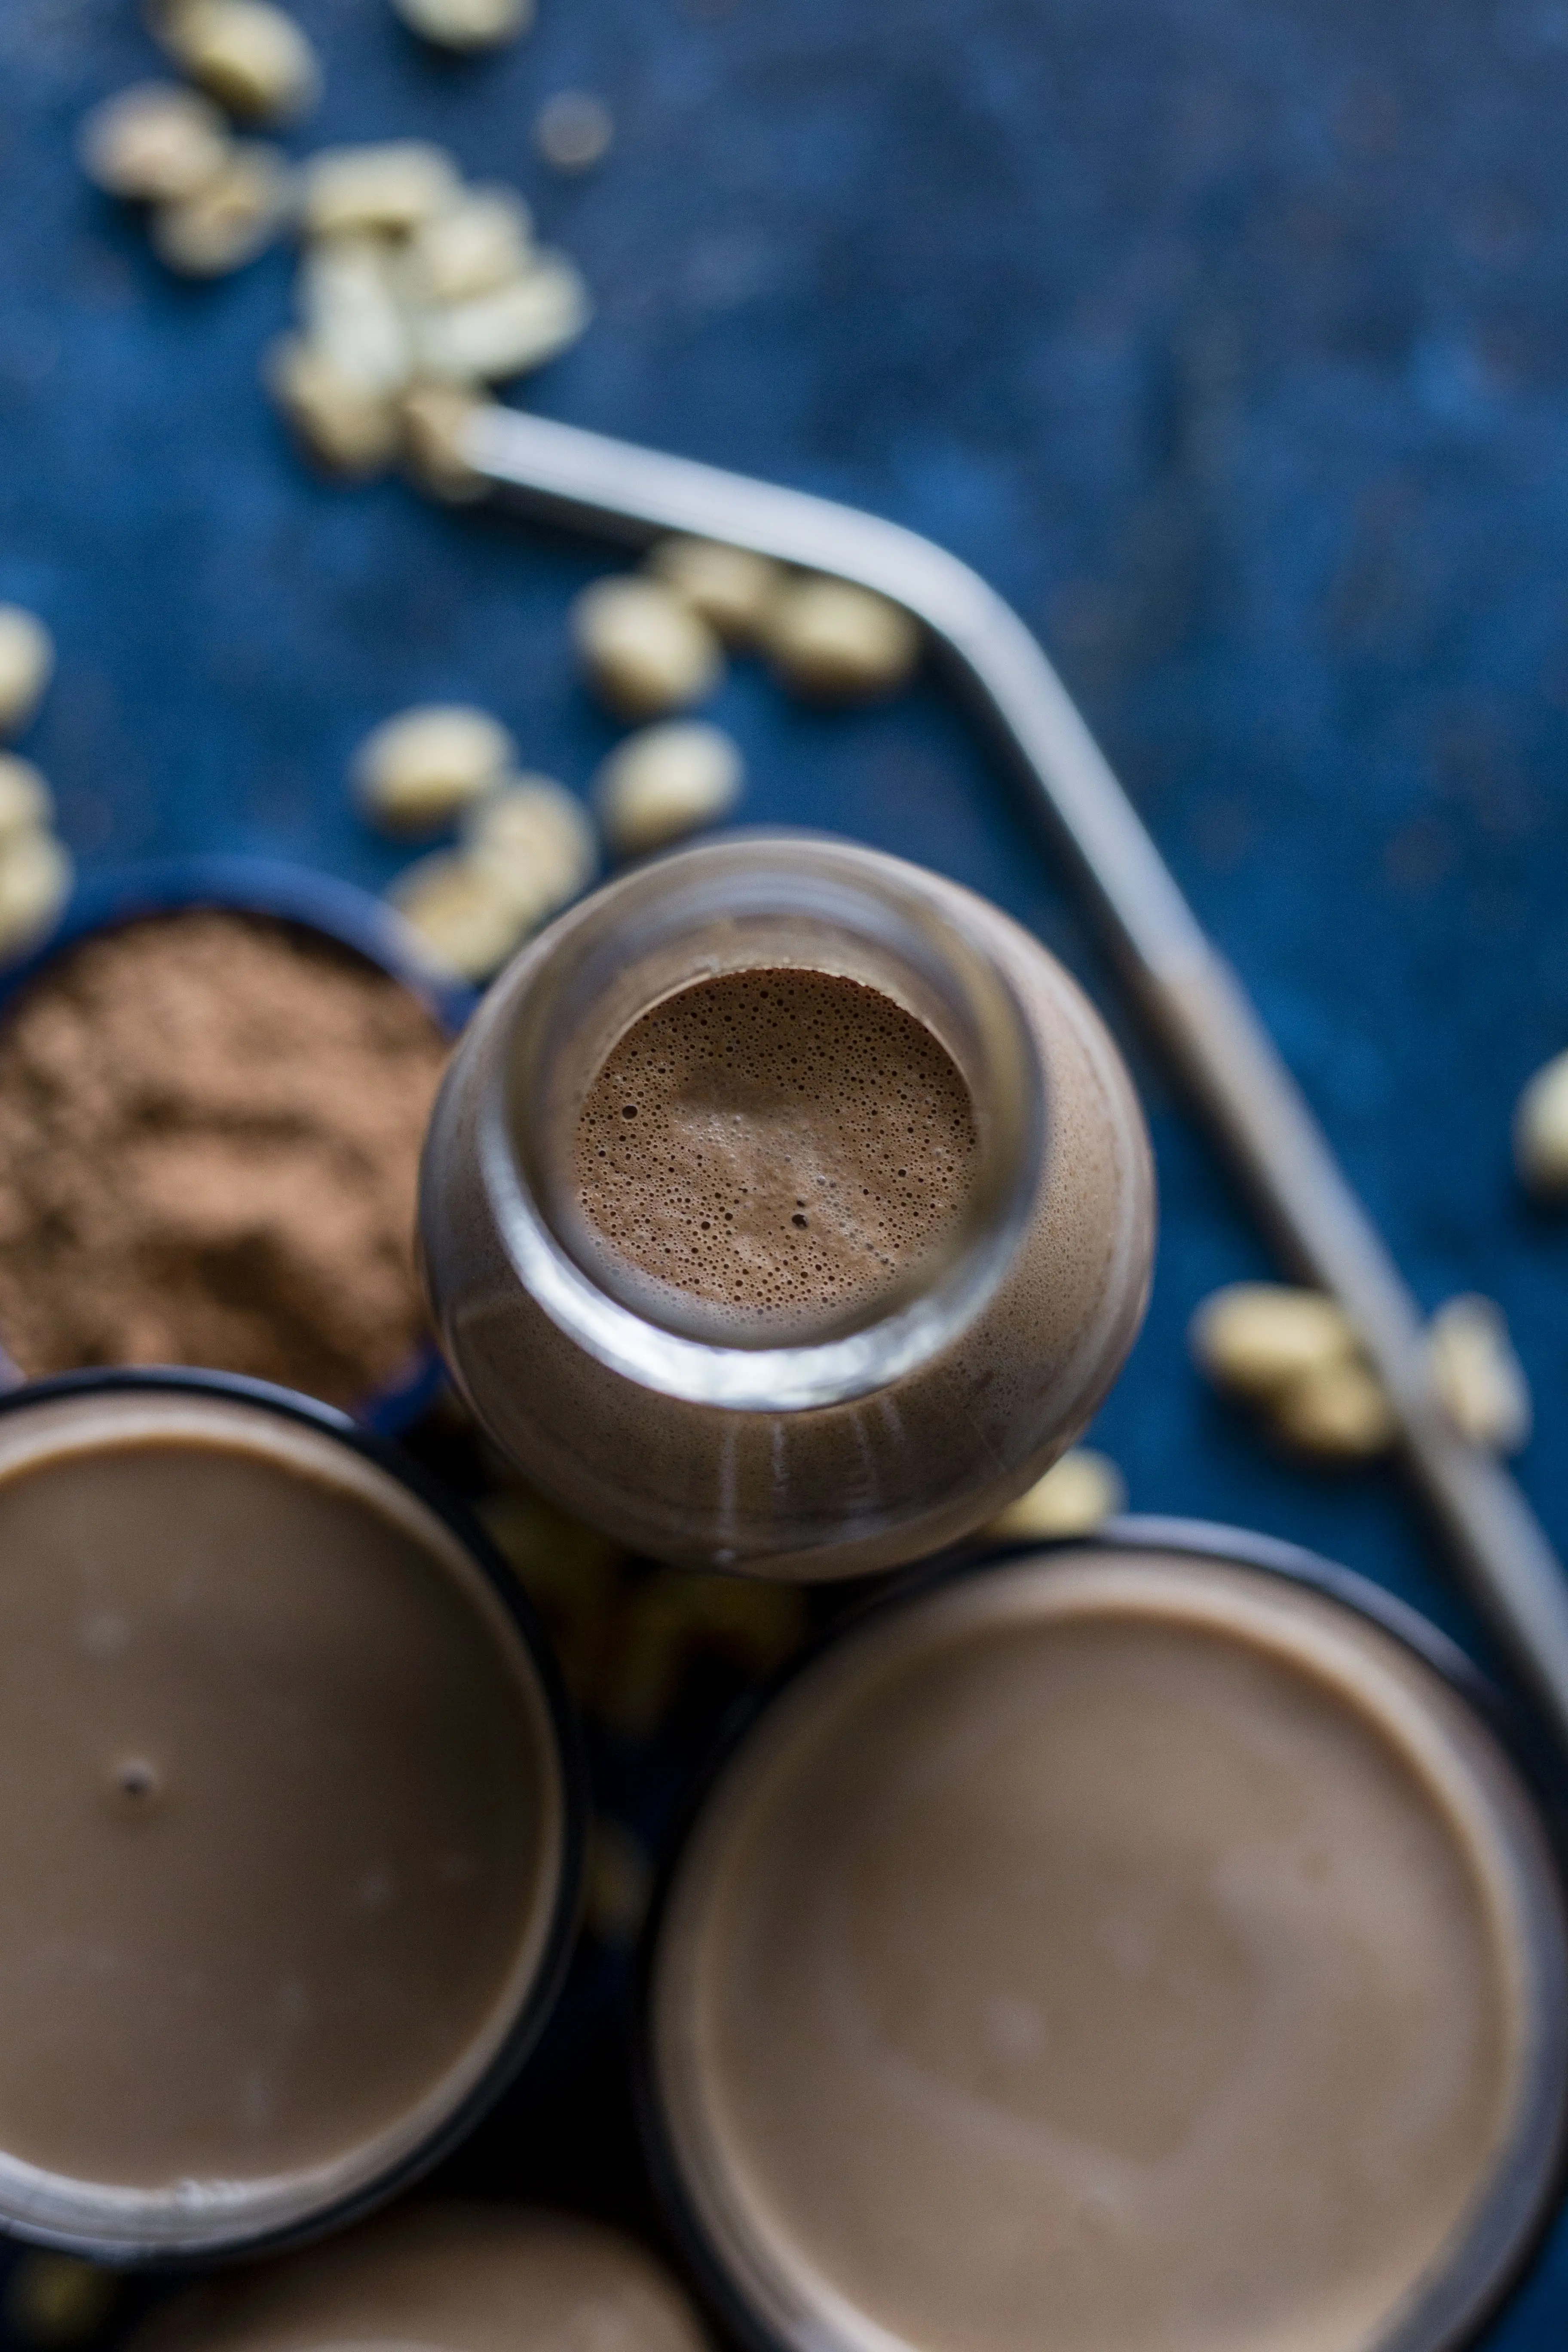 Chocolate Peanut Milk | A tasty dairy free alternative made with peanuts and cacao!